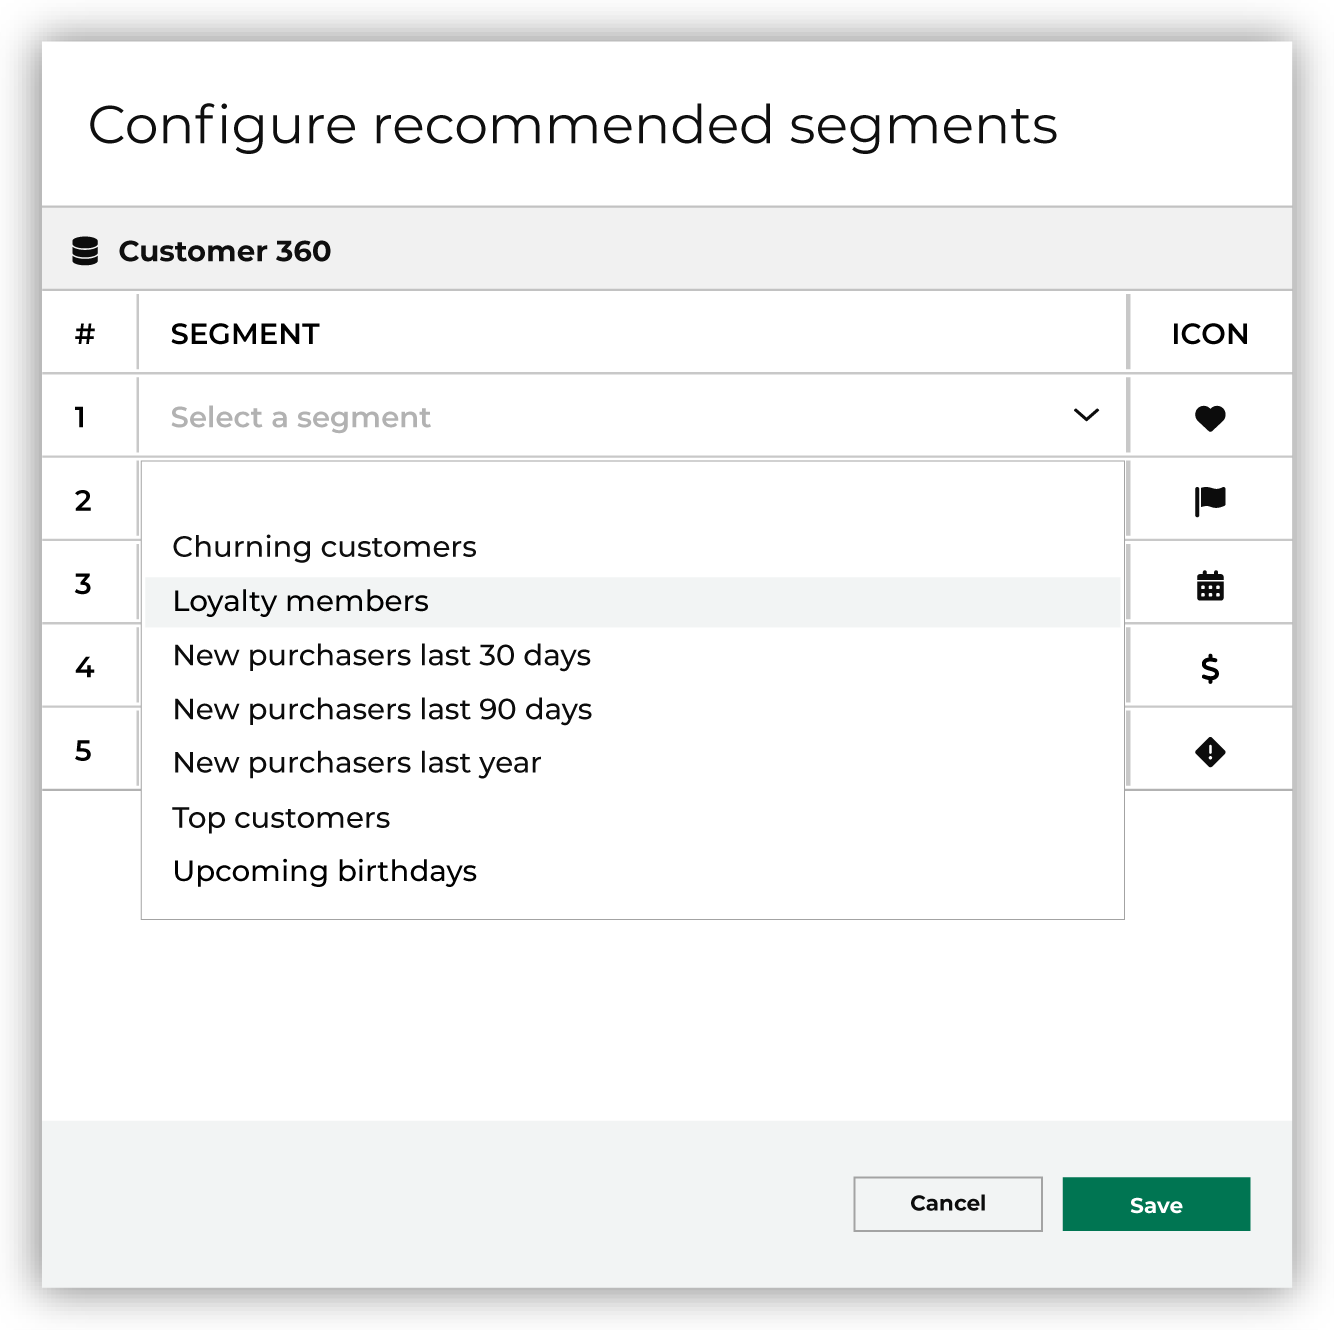 Select a segment to be a recommended segment.